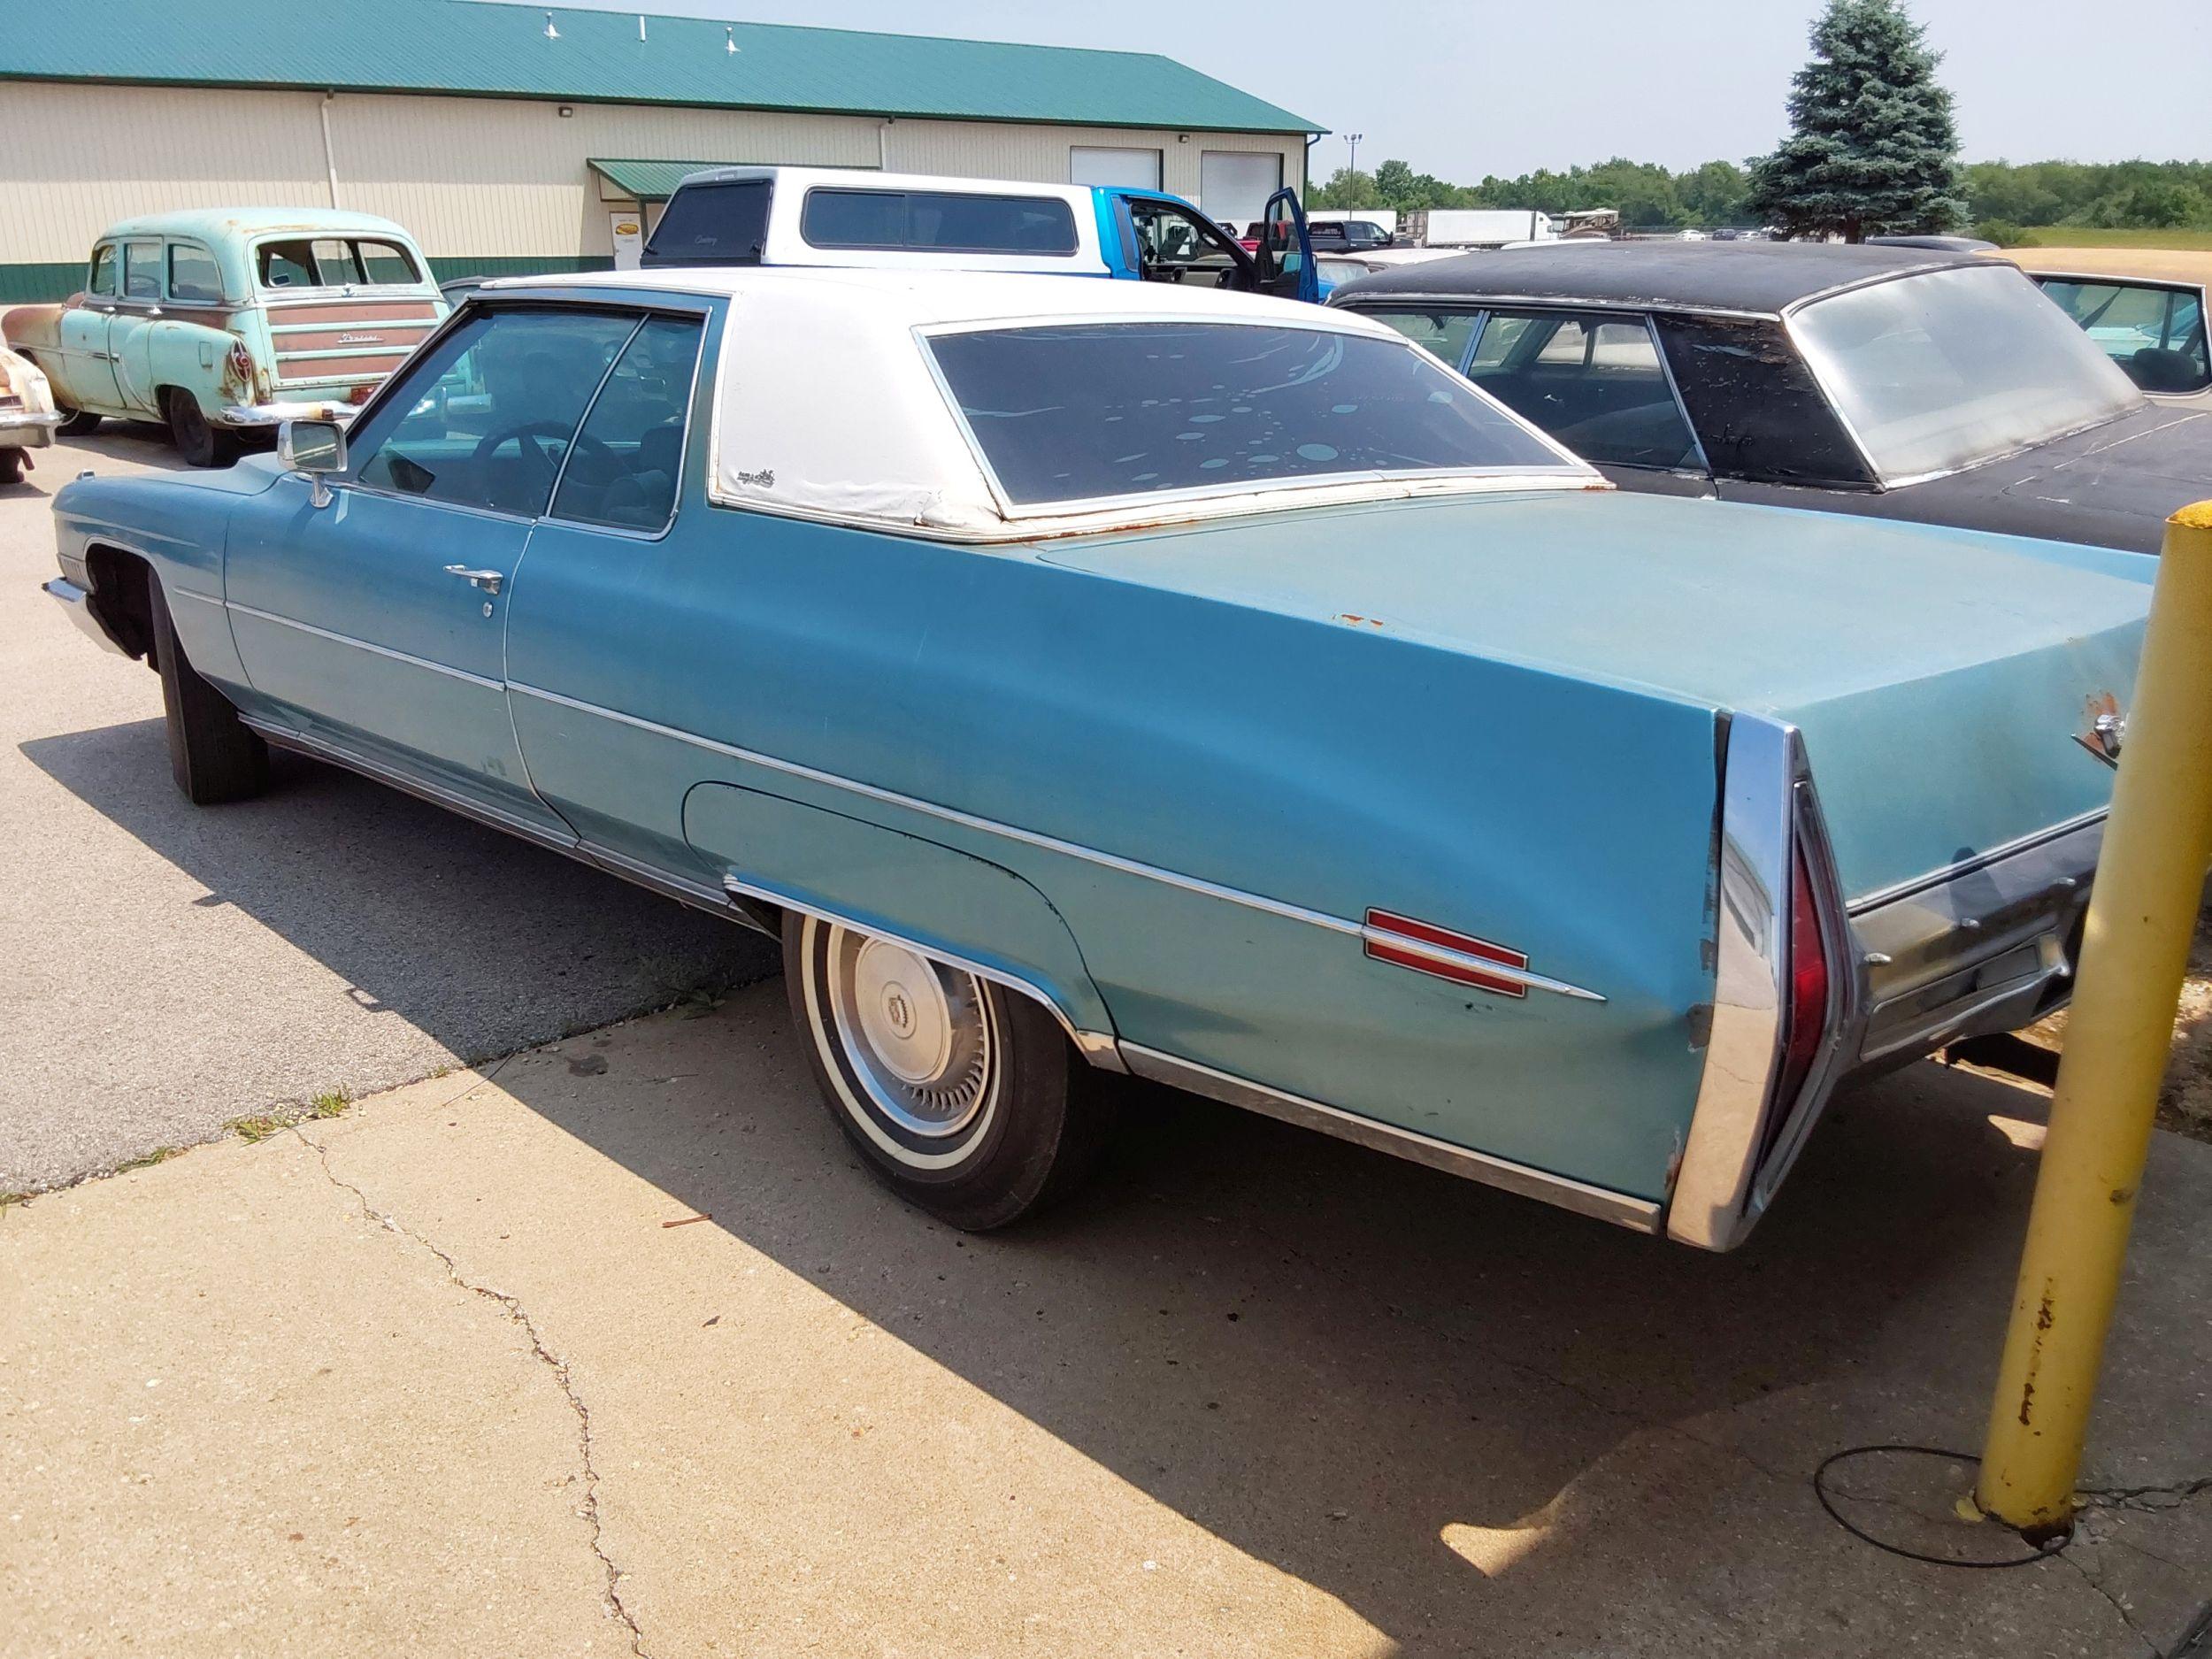 1972 Cadillac Coupe